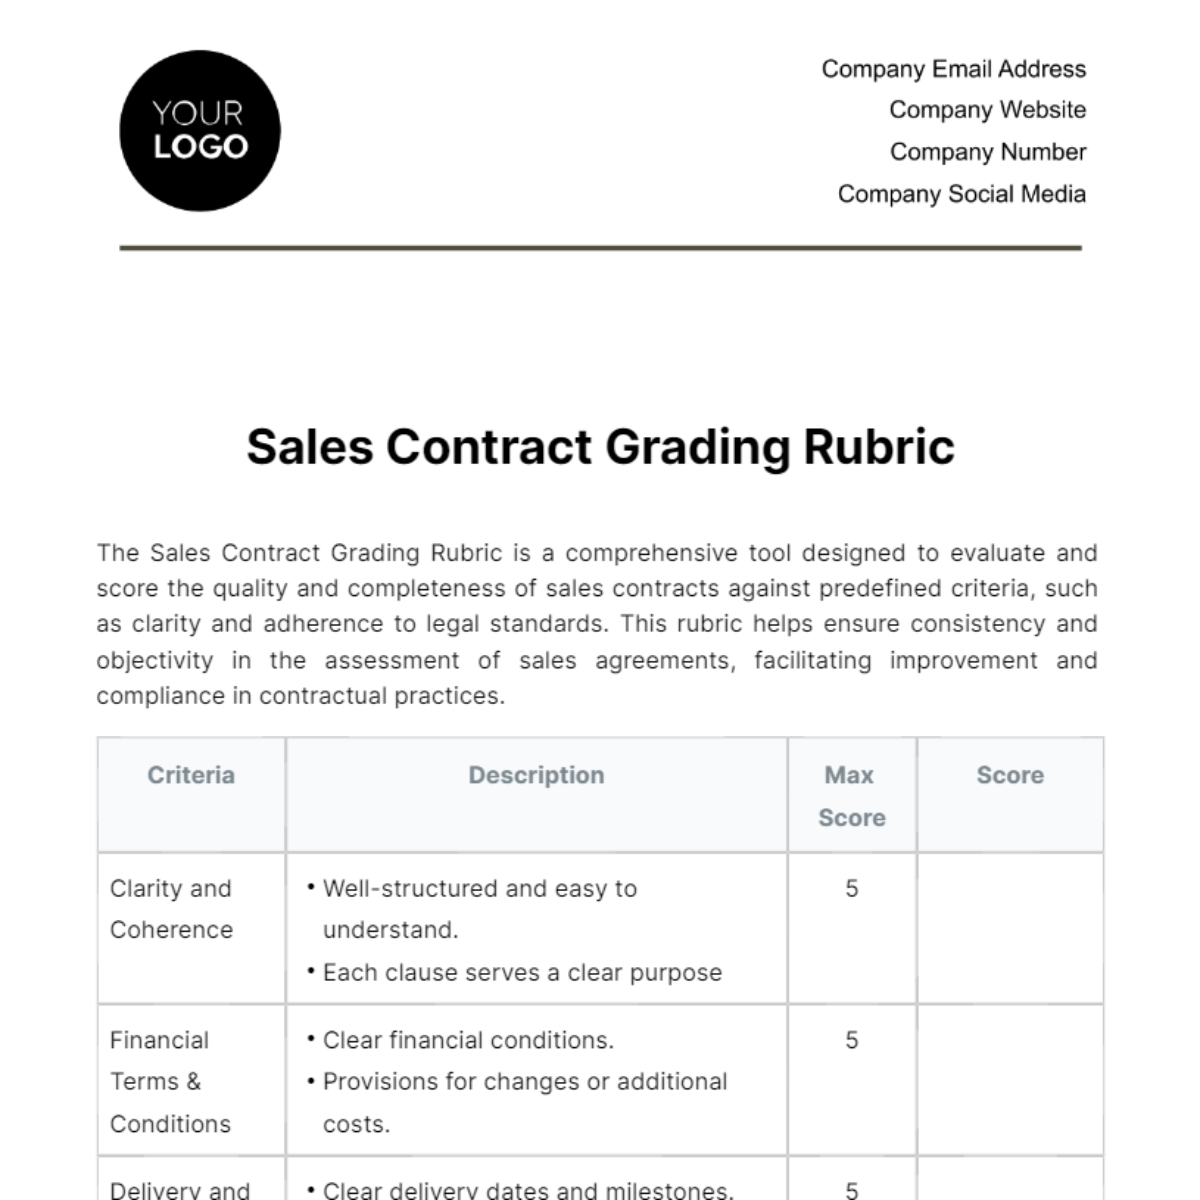 Free Sales Contract Grading Rubric Template